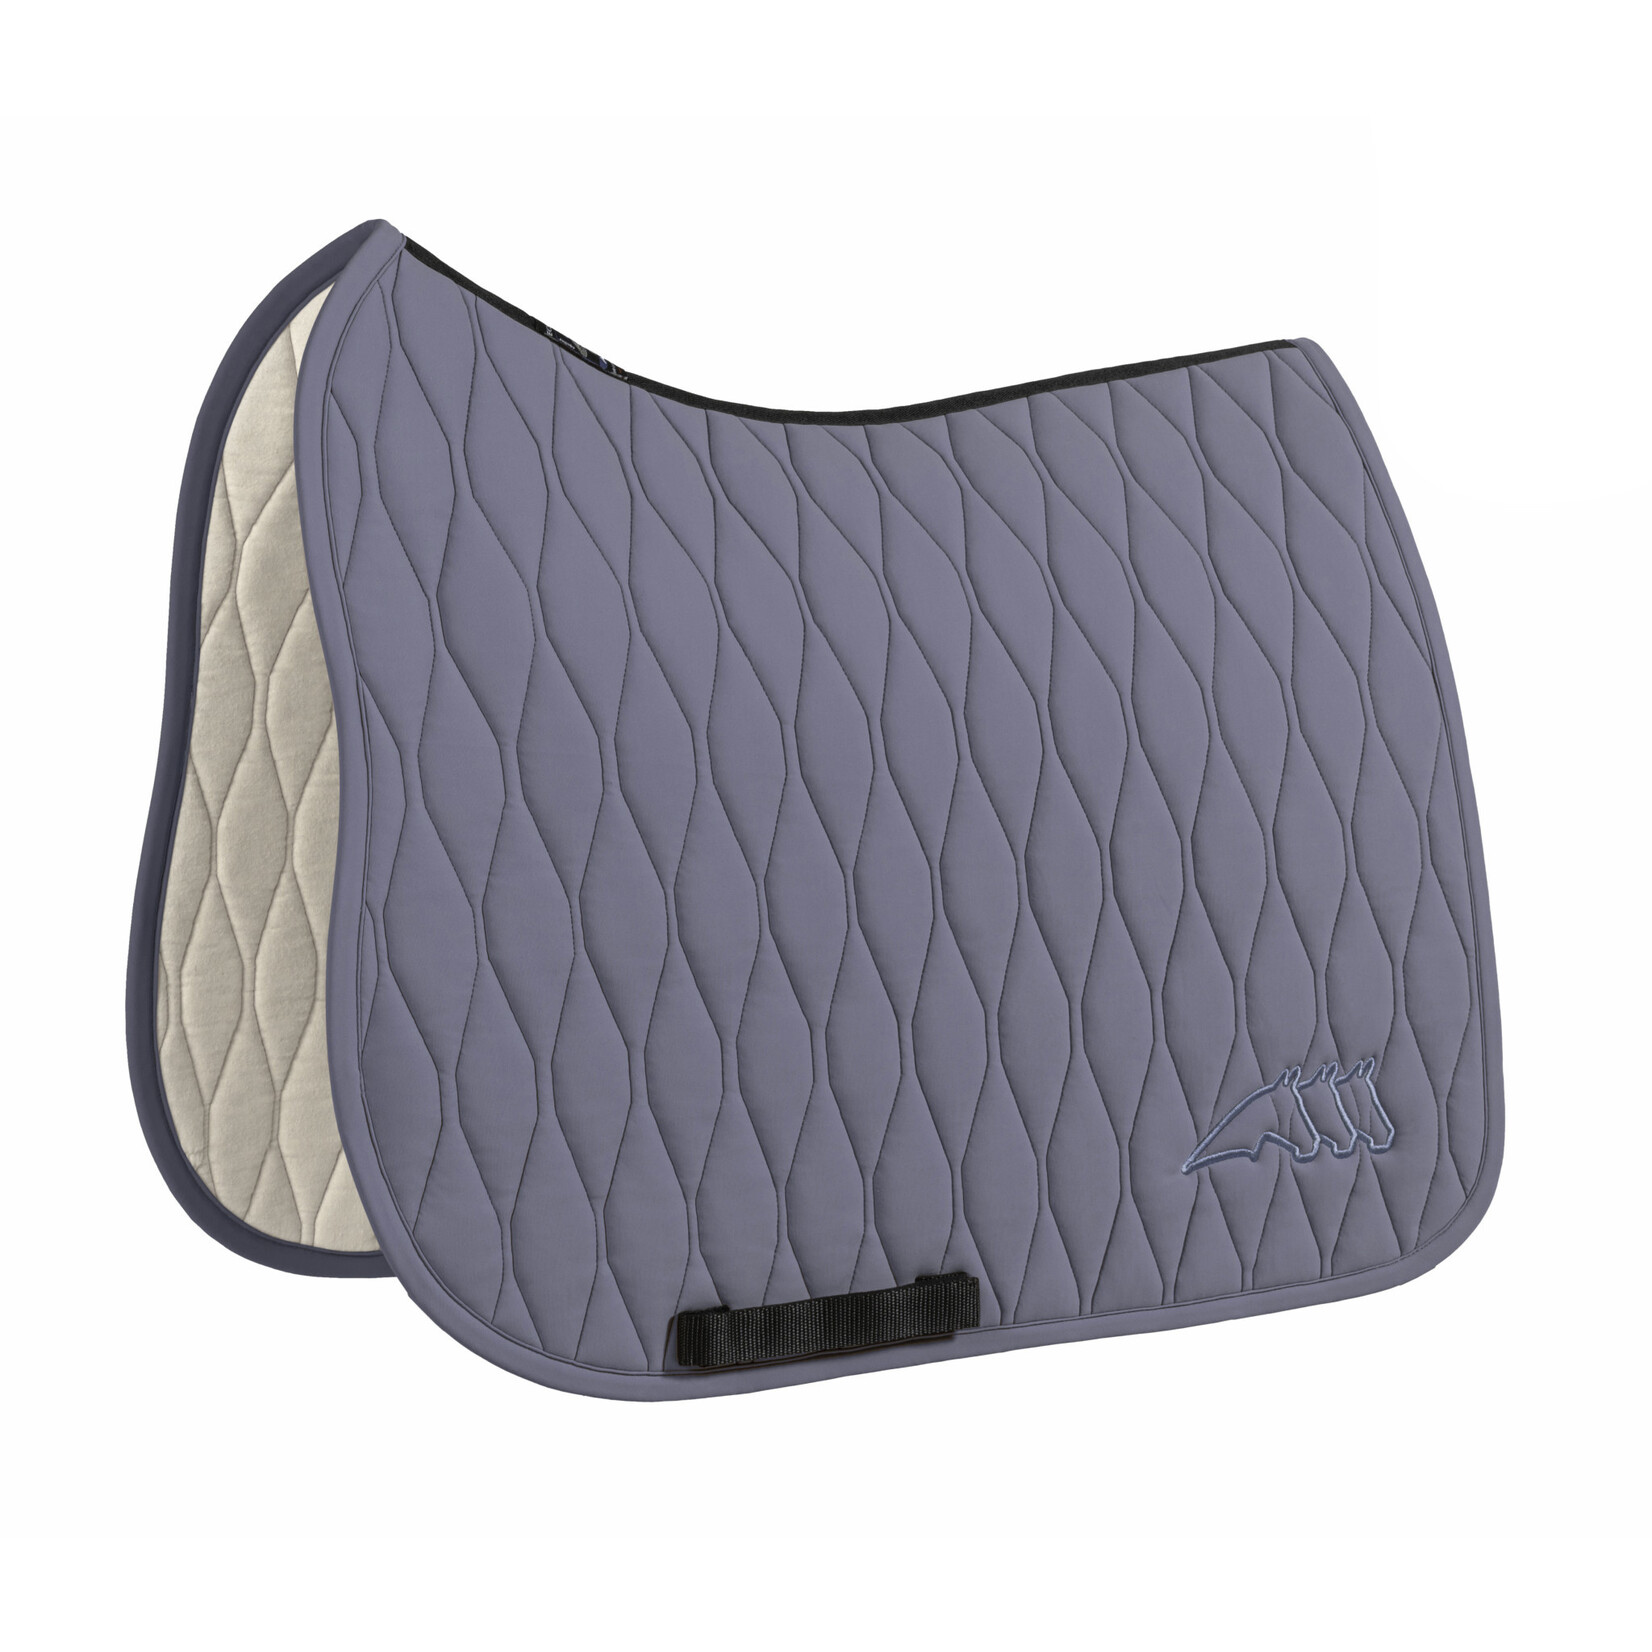 Equiline B11285 Equiline Emabe Tech Saddle Pad